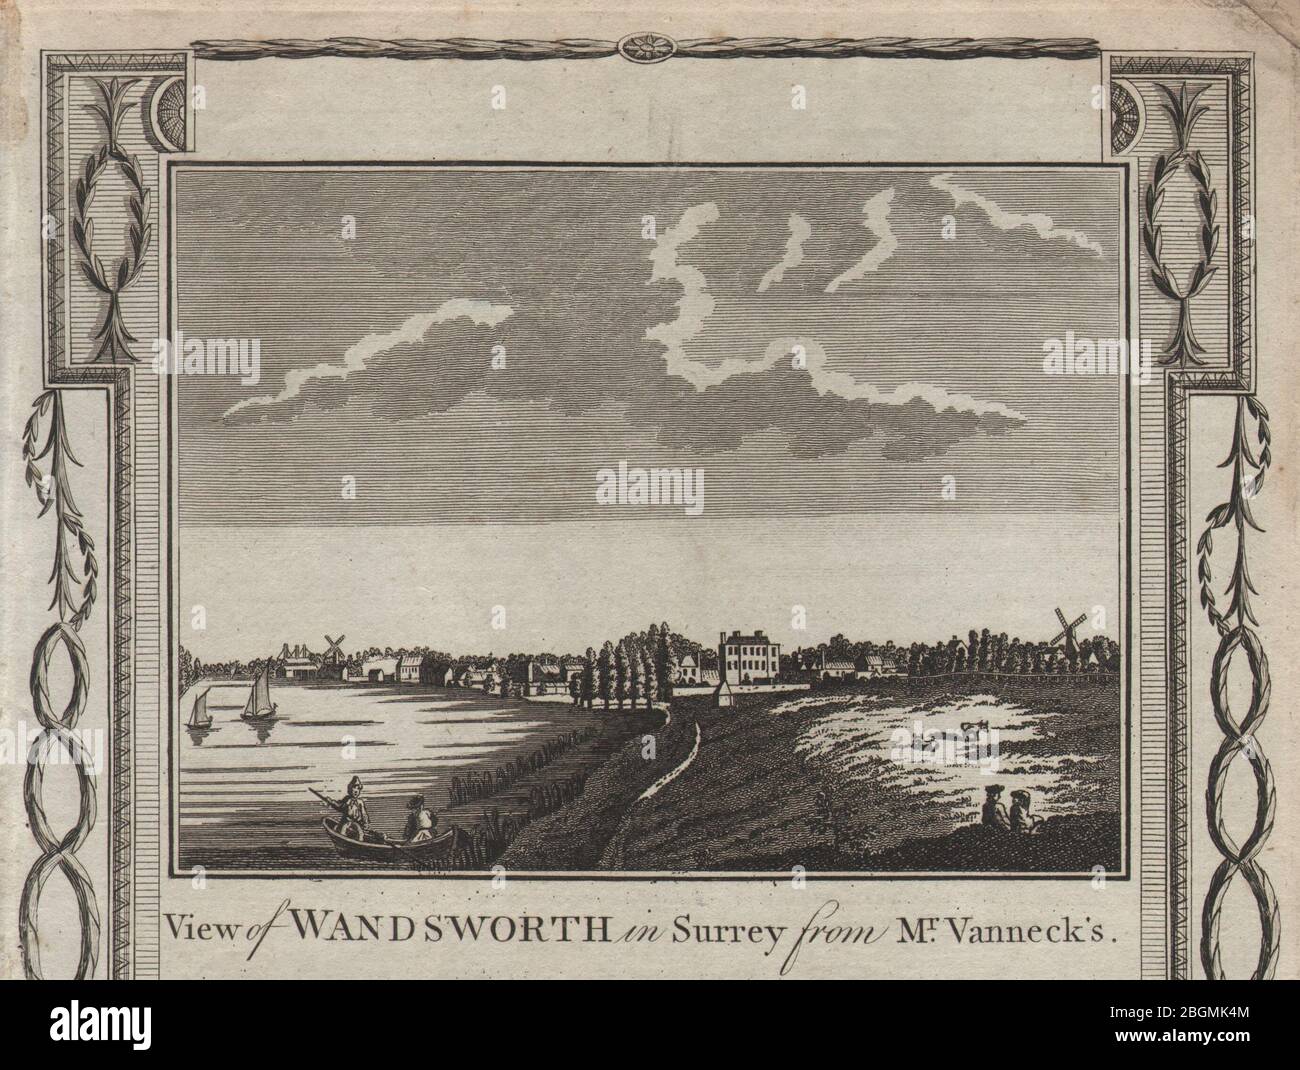 View of Wandsworth from Putney, looking south east. London. THORNTON 1784 Stock Photo